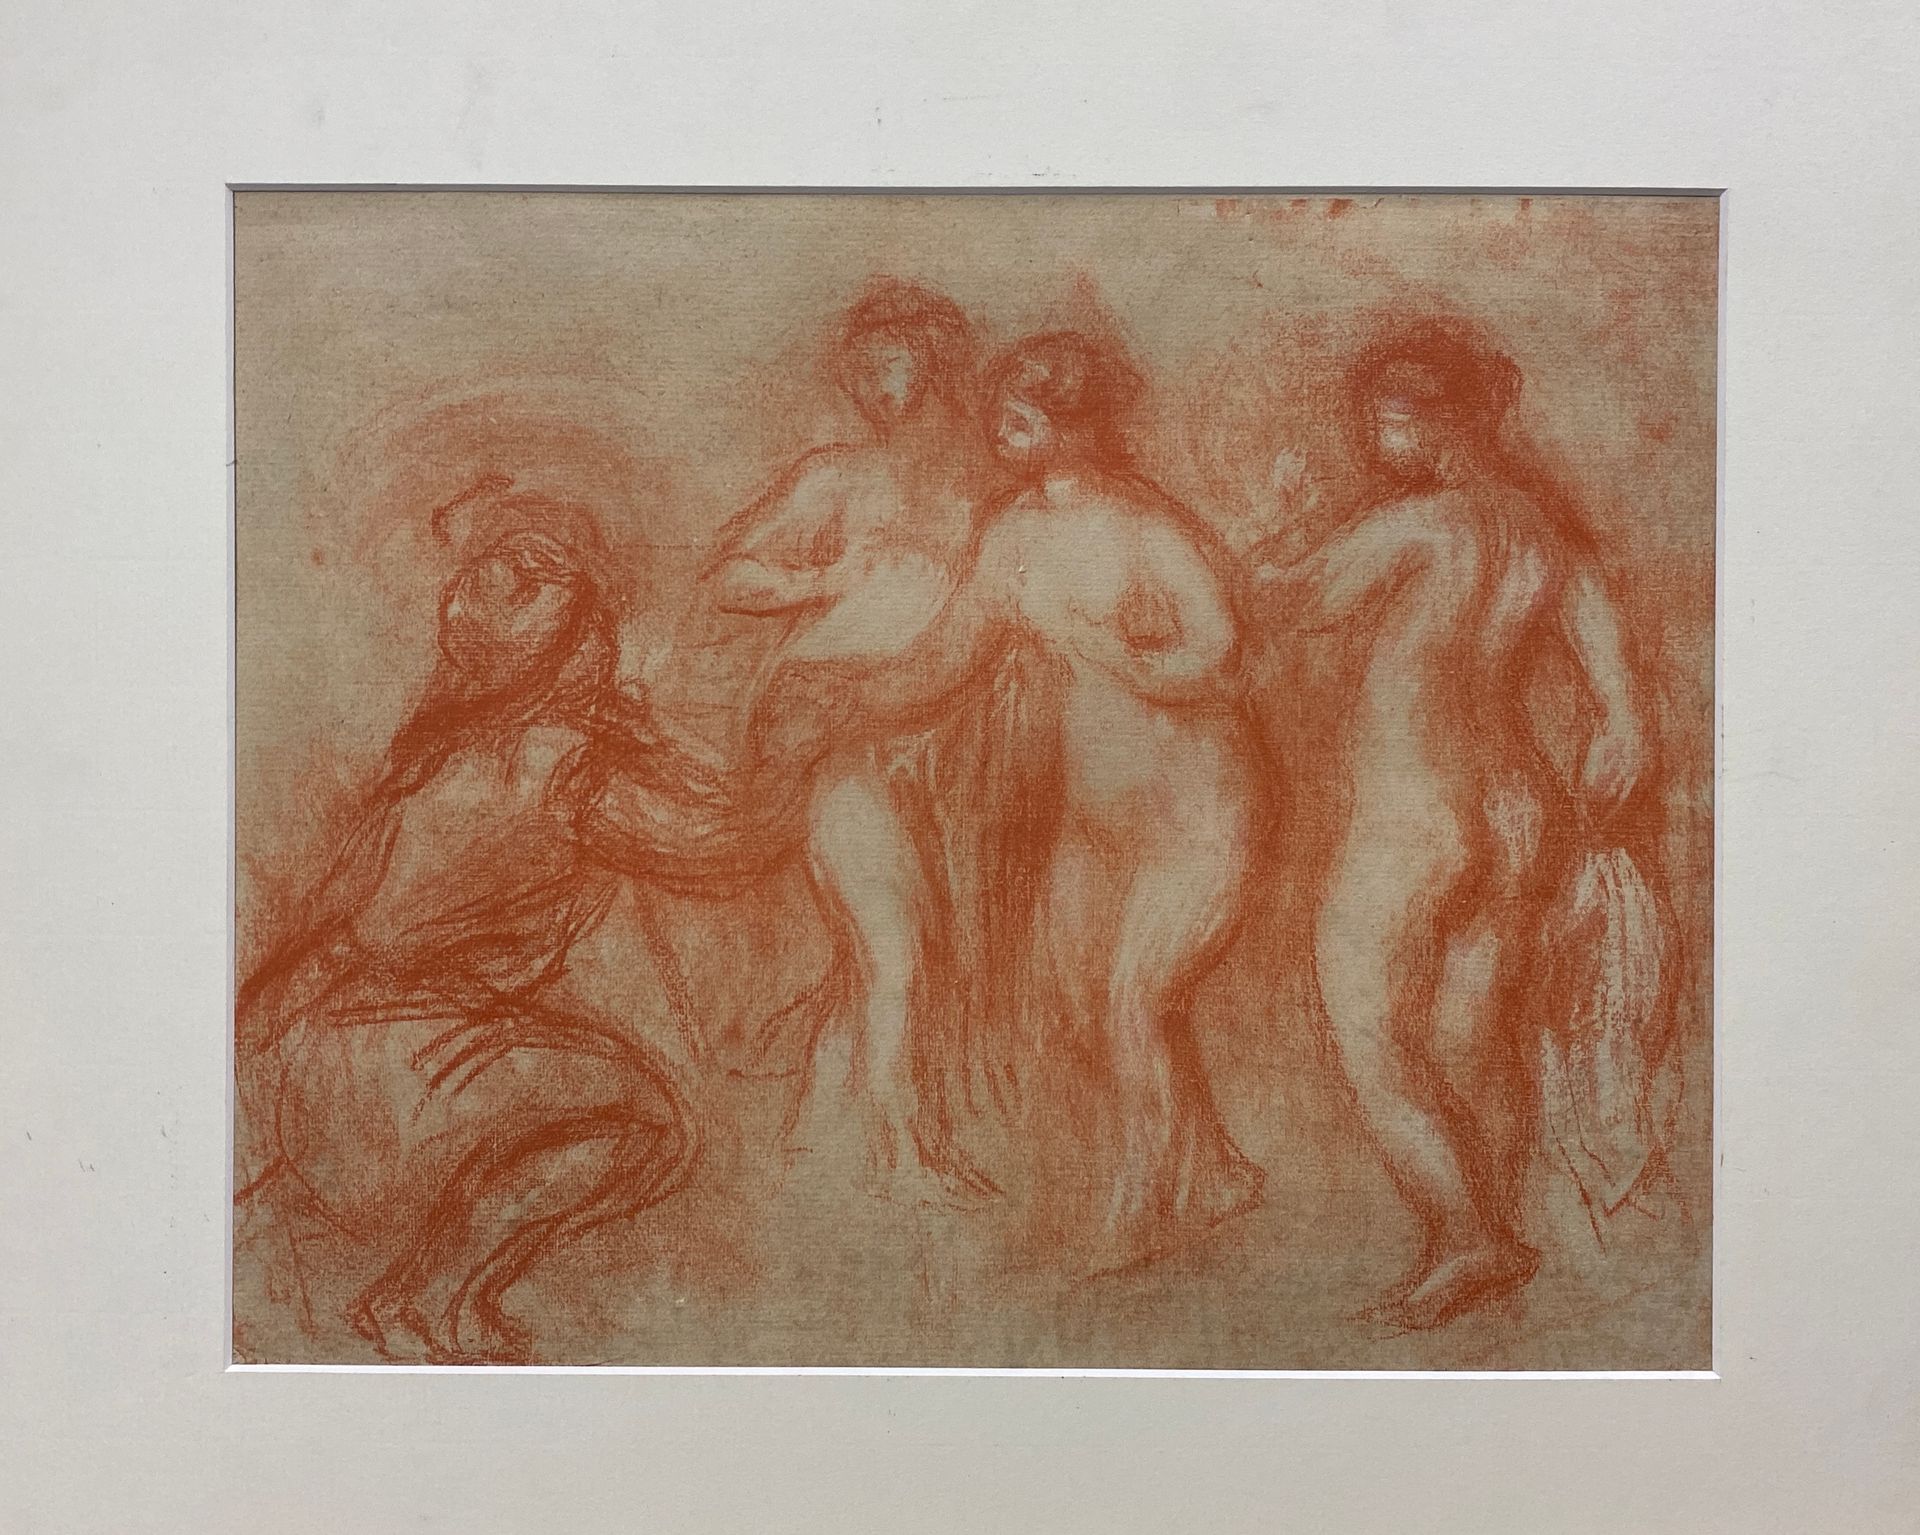 Null RENOIR after

The Three Graces

Engraved plate in the manner of the sanguin&hellip;